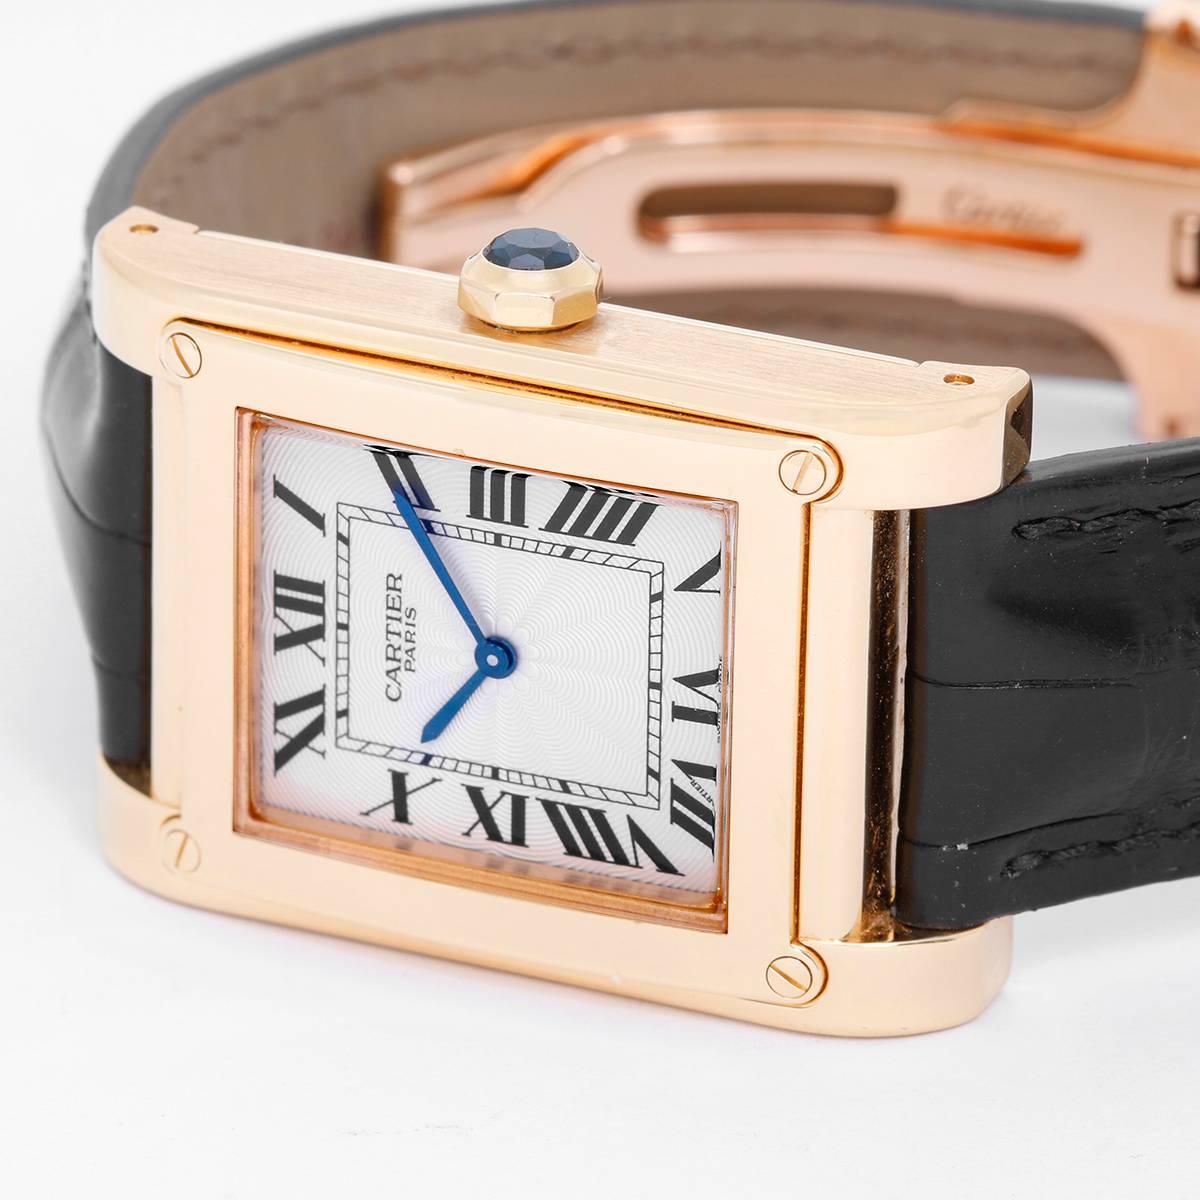 Cartier Tank A Vis Ref 2608 F Watch -  Manual. 18K Yellow Gold ( 18 mm x 40.5 mm ). White dial with Roman Numerals. Cartier black strap with 18K gold Cartier deployant clasp. Pre-owned with box and papers. Service papers, original invoice too. Full